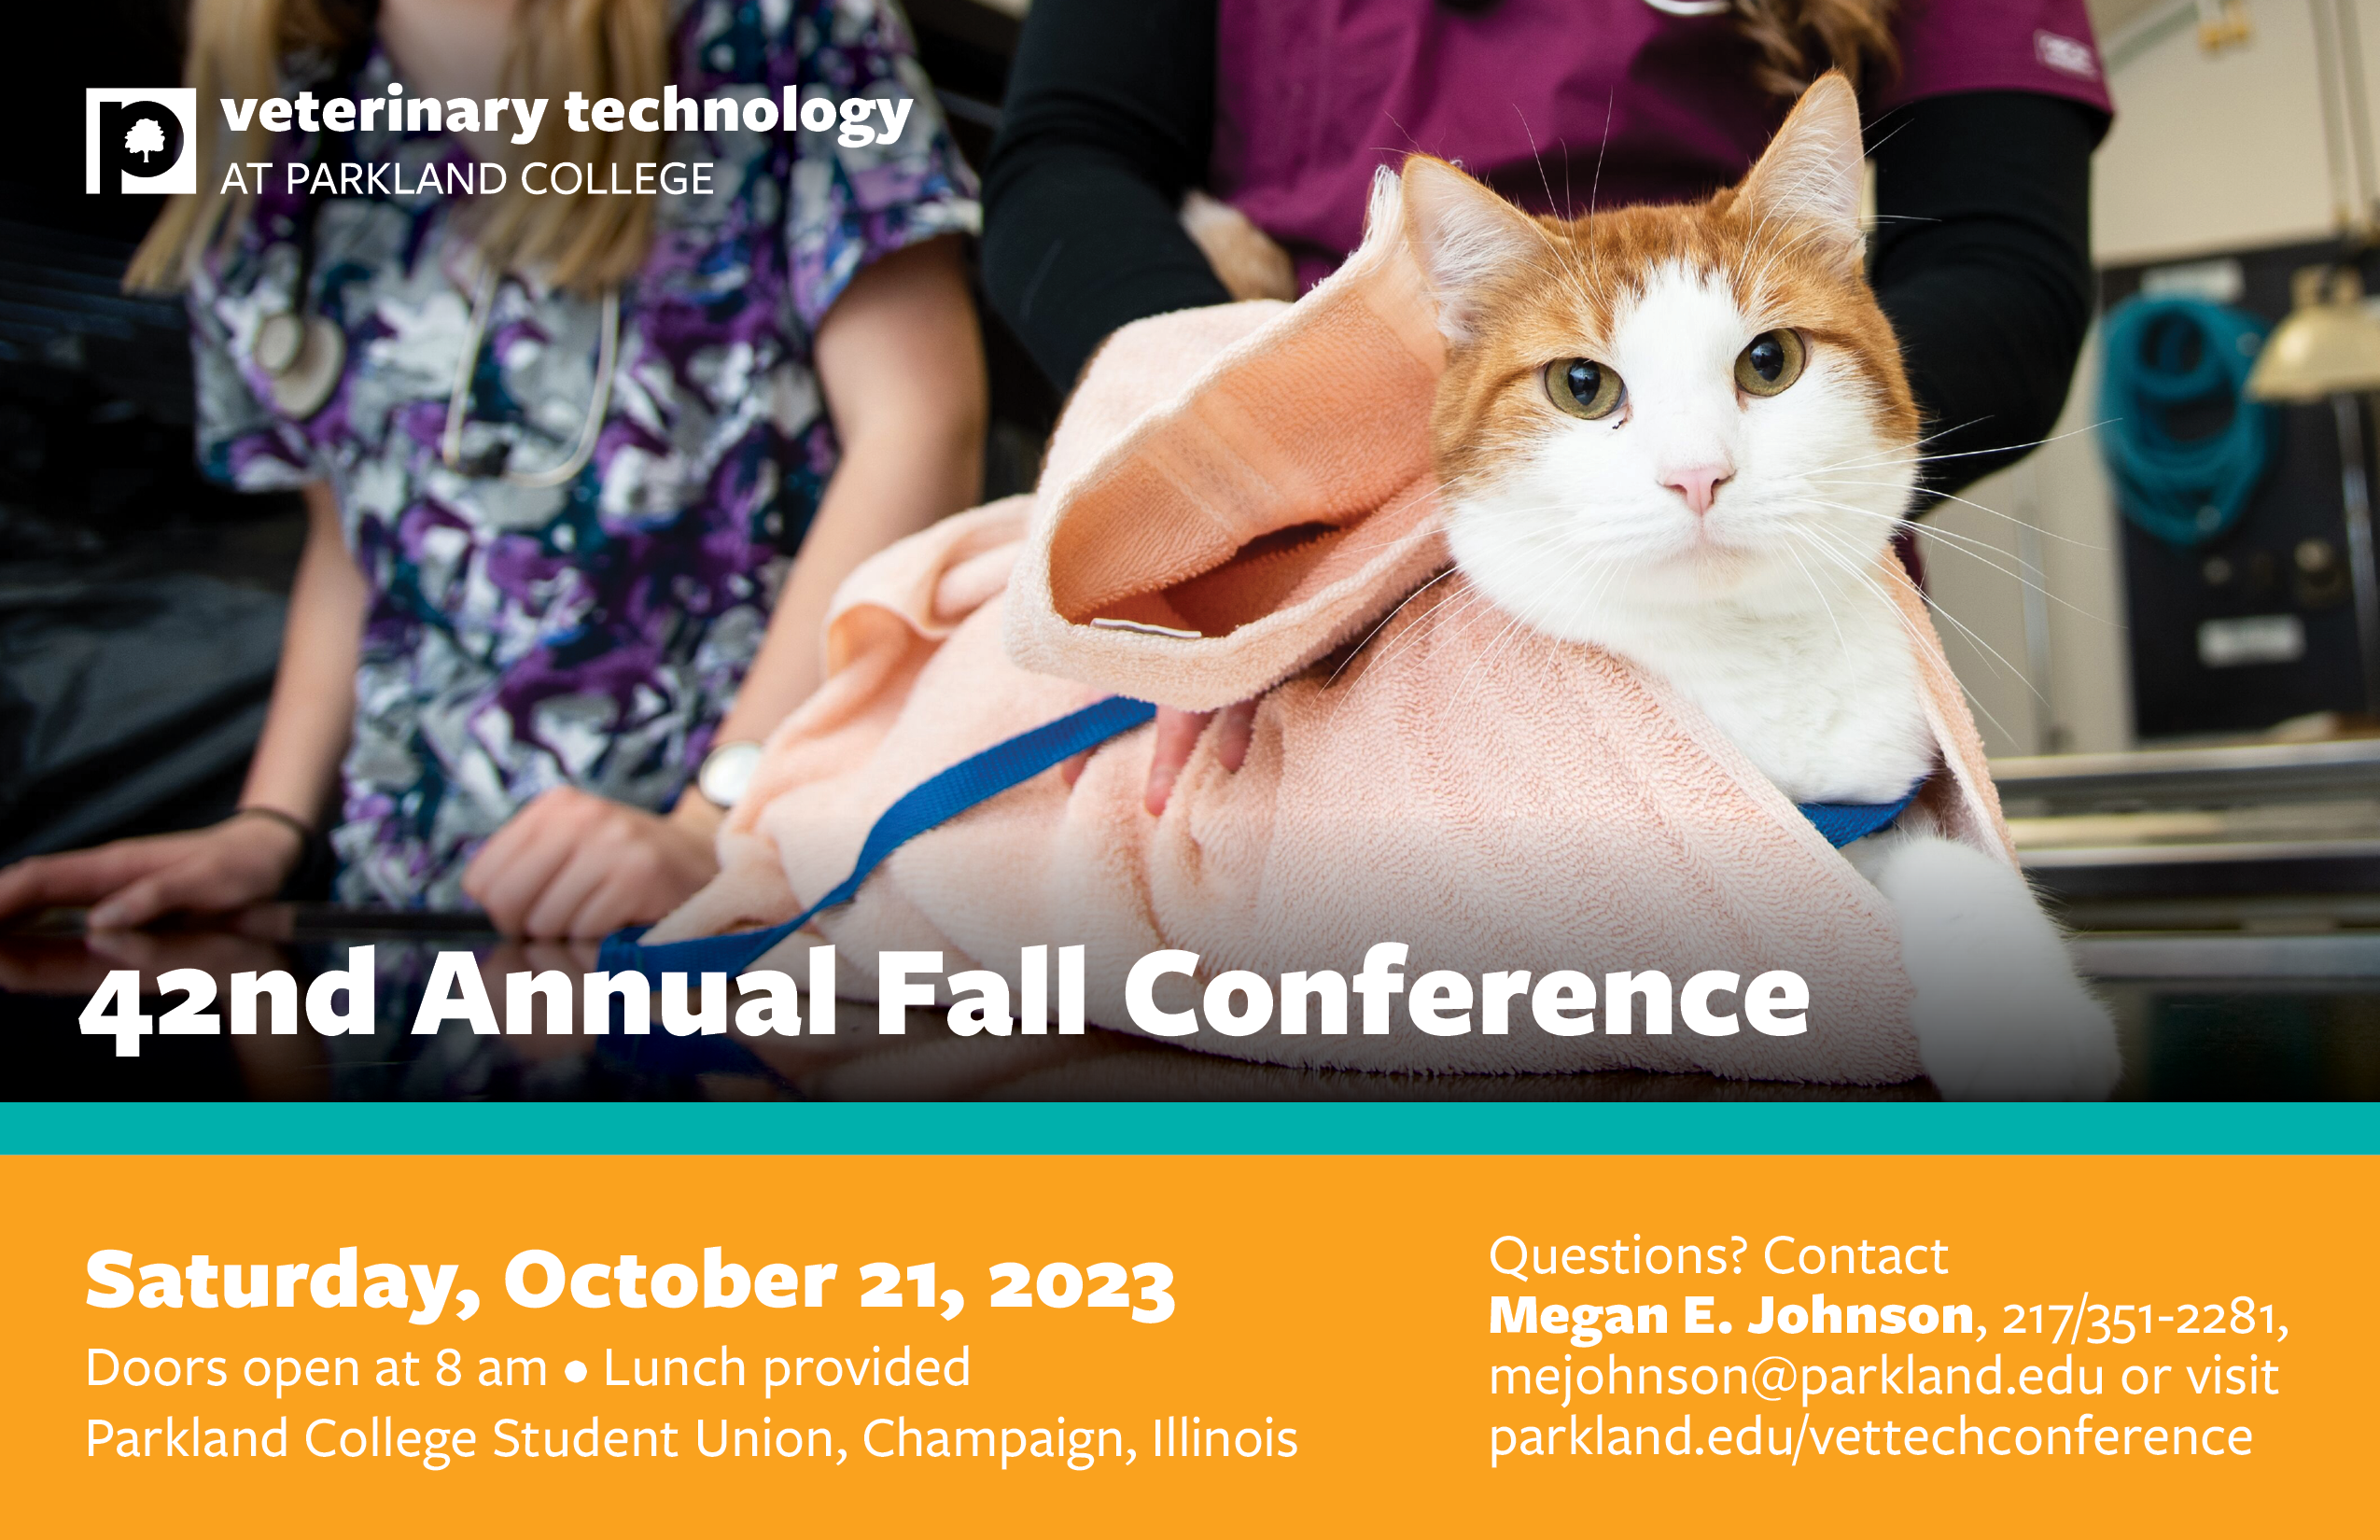 42nd Annual Fall Vet Tech Conference on Saturday October 21. Contact Megan Johnson at mejohnson@parkland.edu to learn more